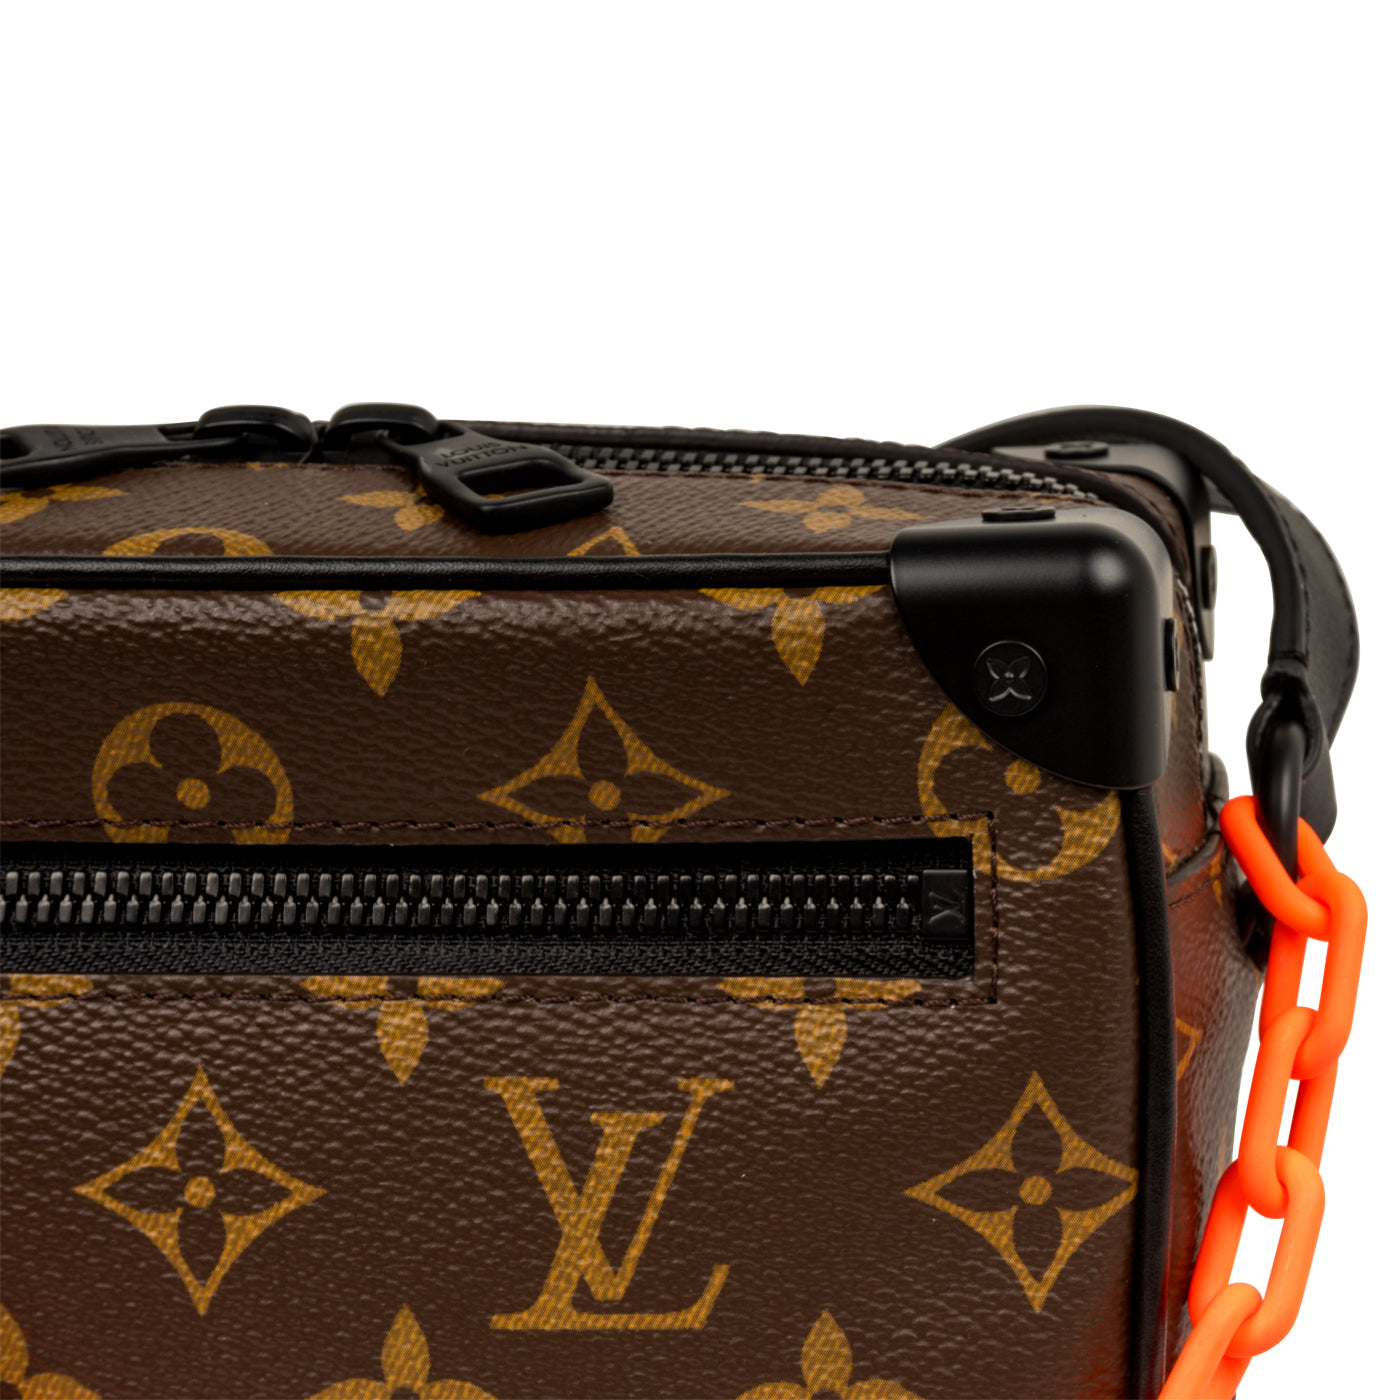 Louis Vuitton - SS19 Soft Trunk - Virgil Abloh - Sold out - Brand New